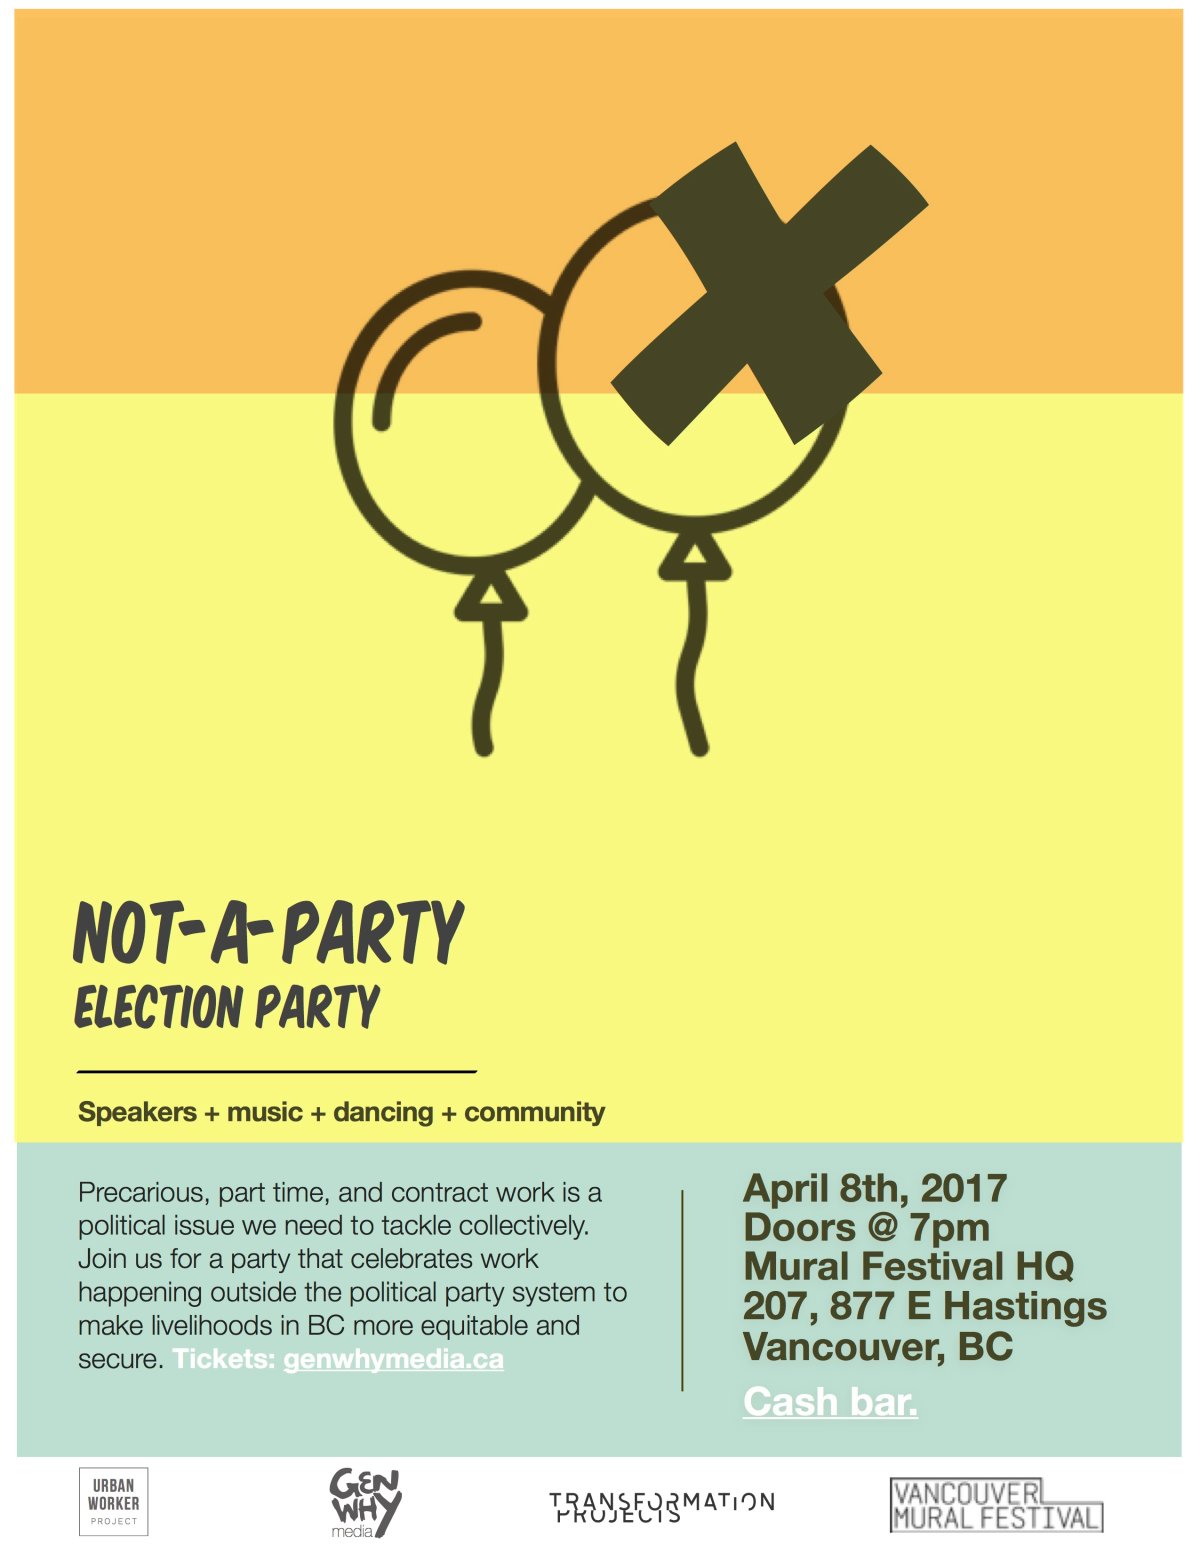 Not-a-Party Election Party - image